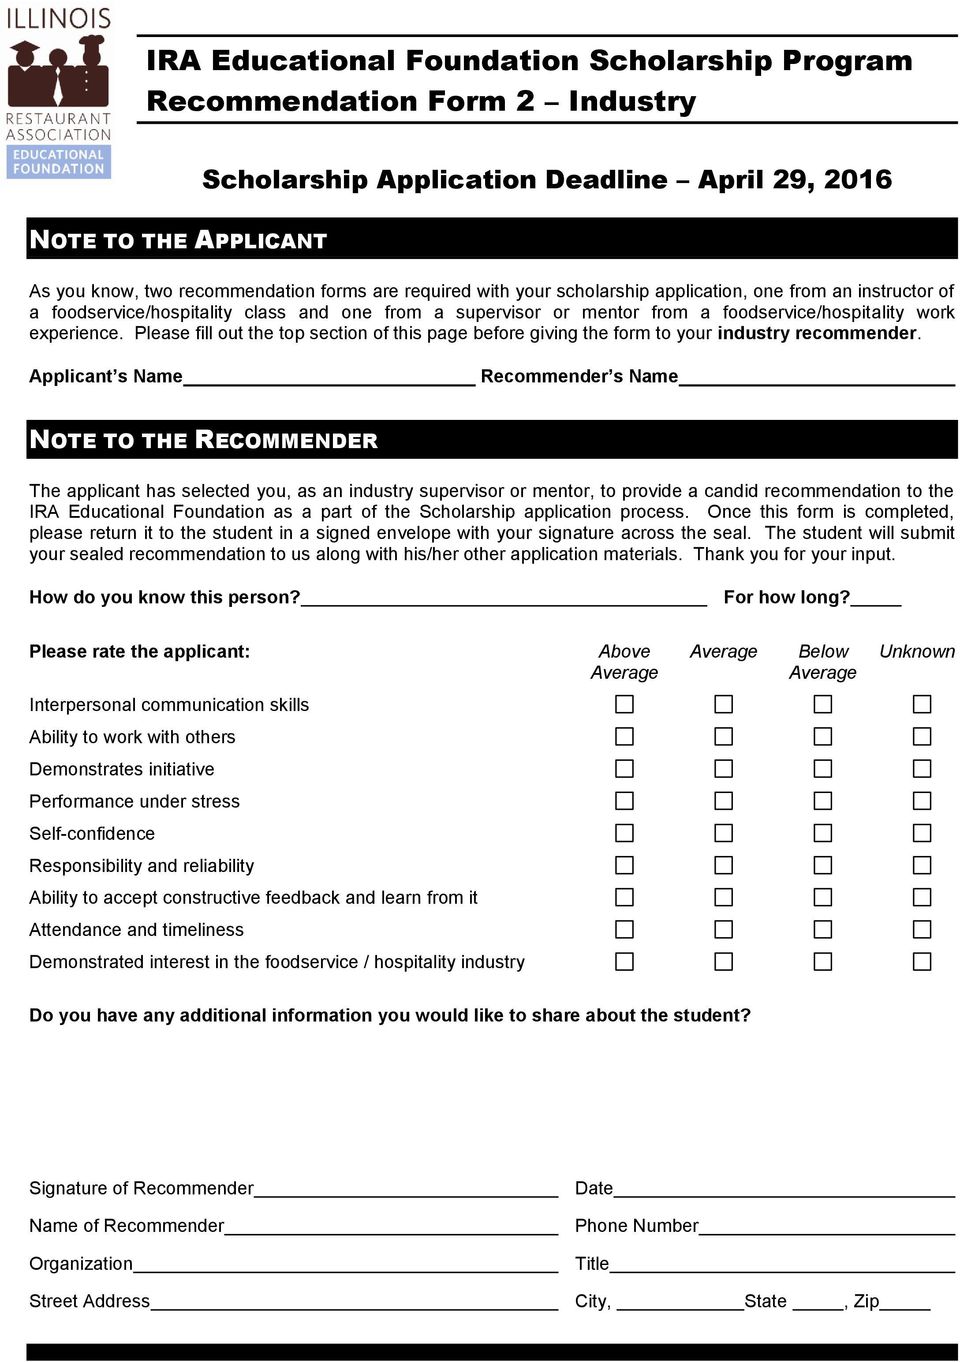 Please fill out the top section of this page before giving the form to your industry recommender.